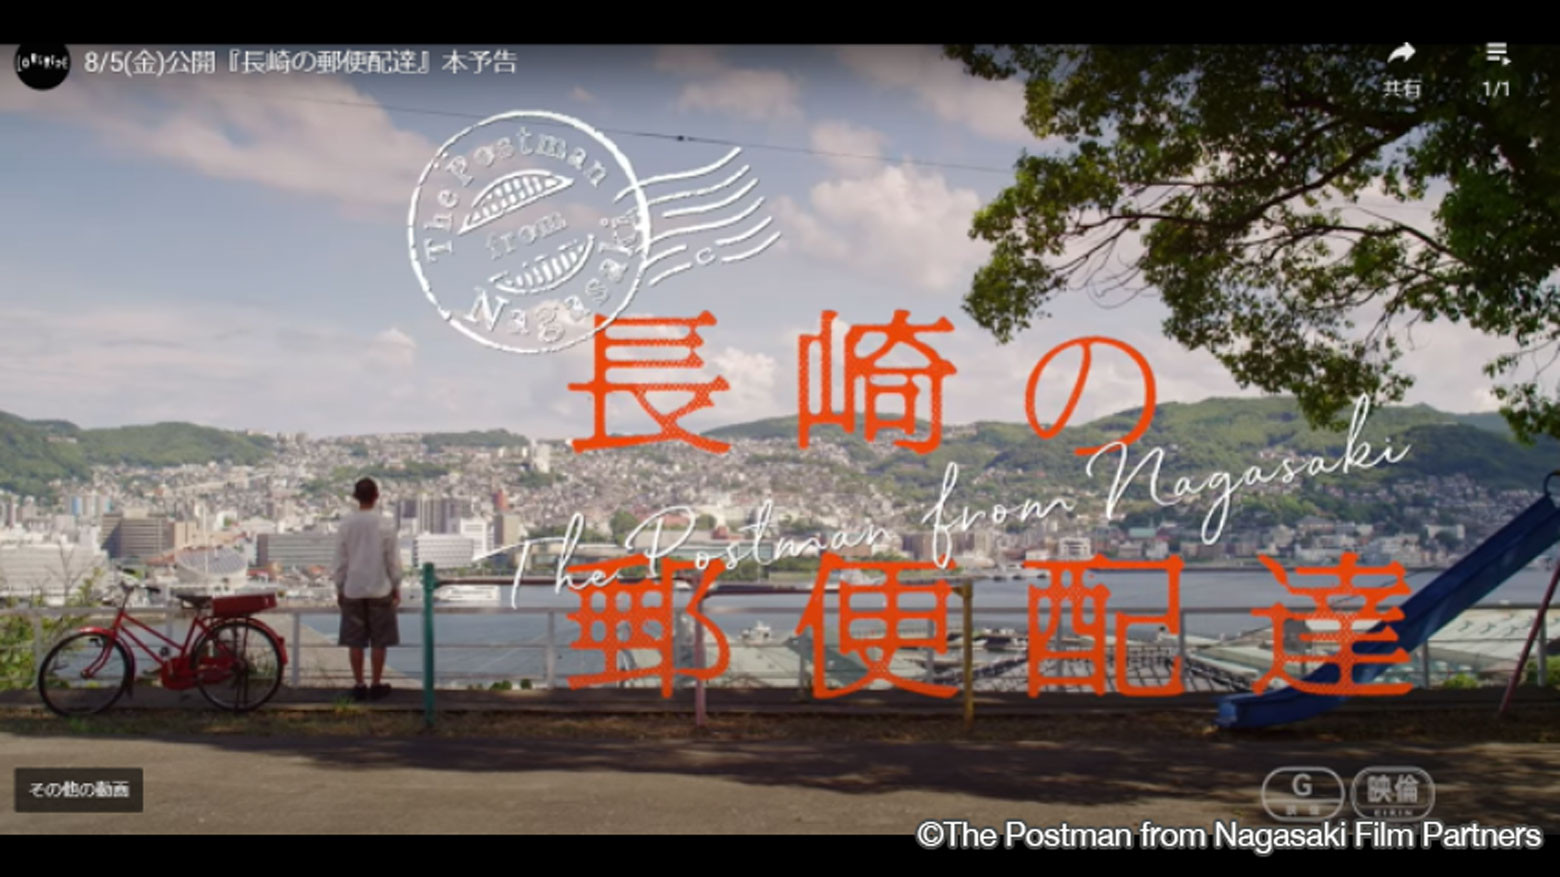 "The Postman from Nagasaki:" A film with a powerful message